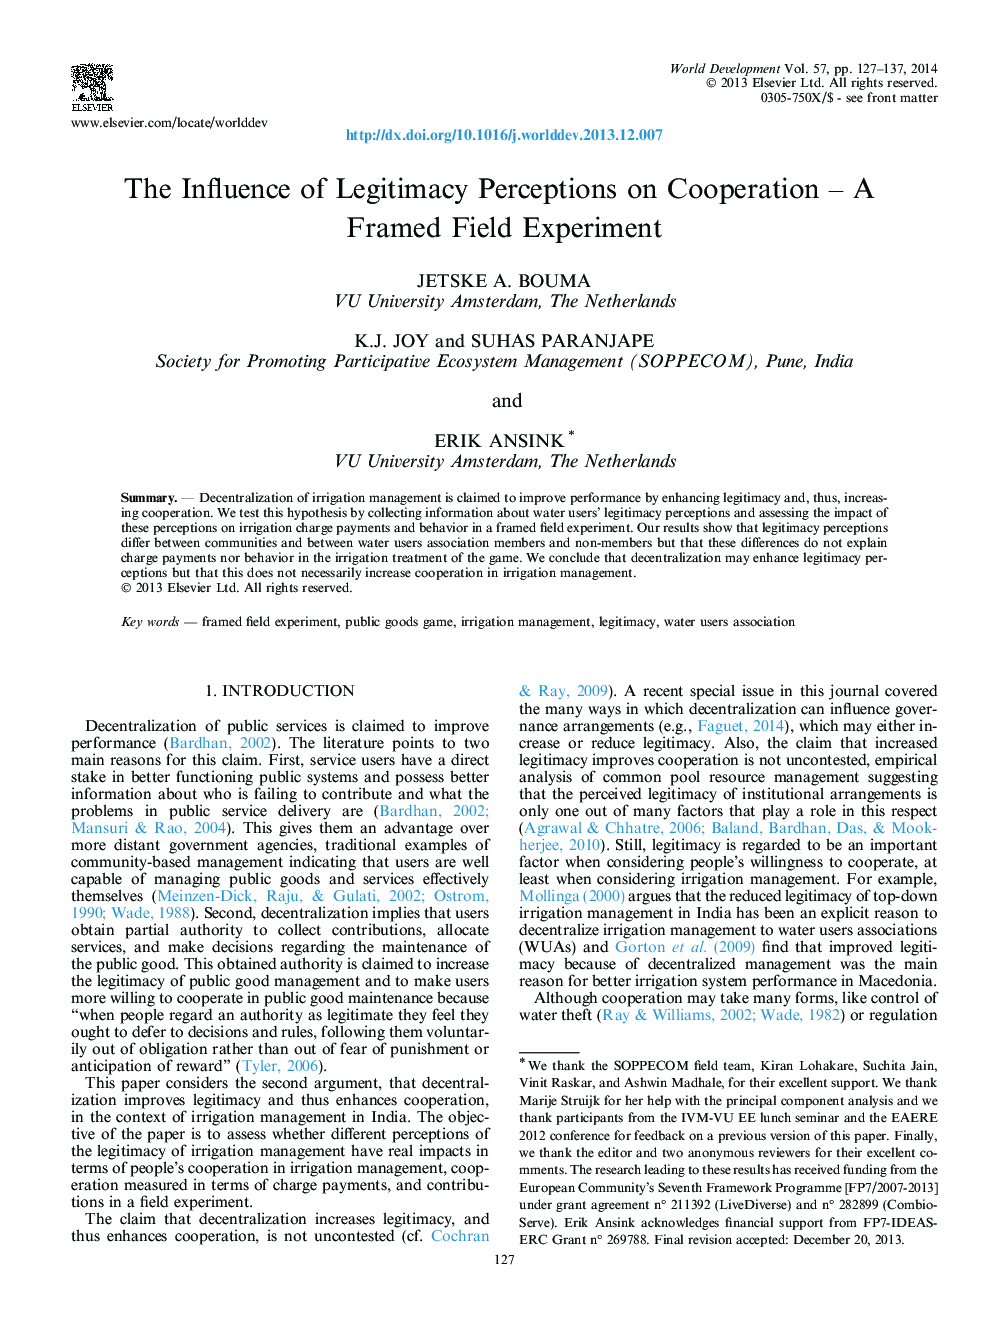 The Influence of Legitimacy Perceptions on Cooperation – A Framed Field Experiment